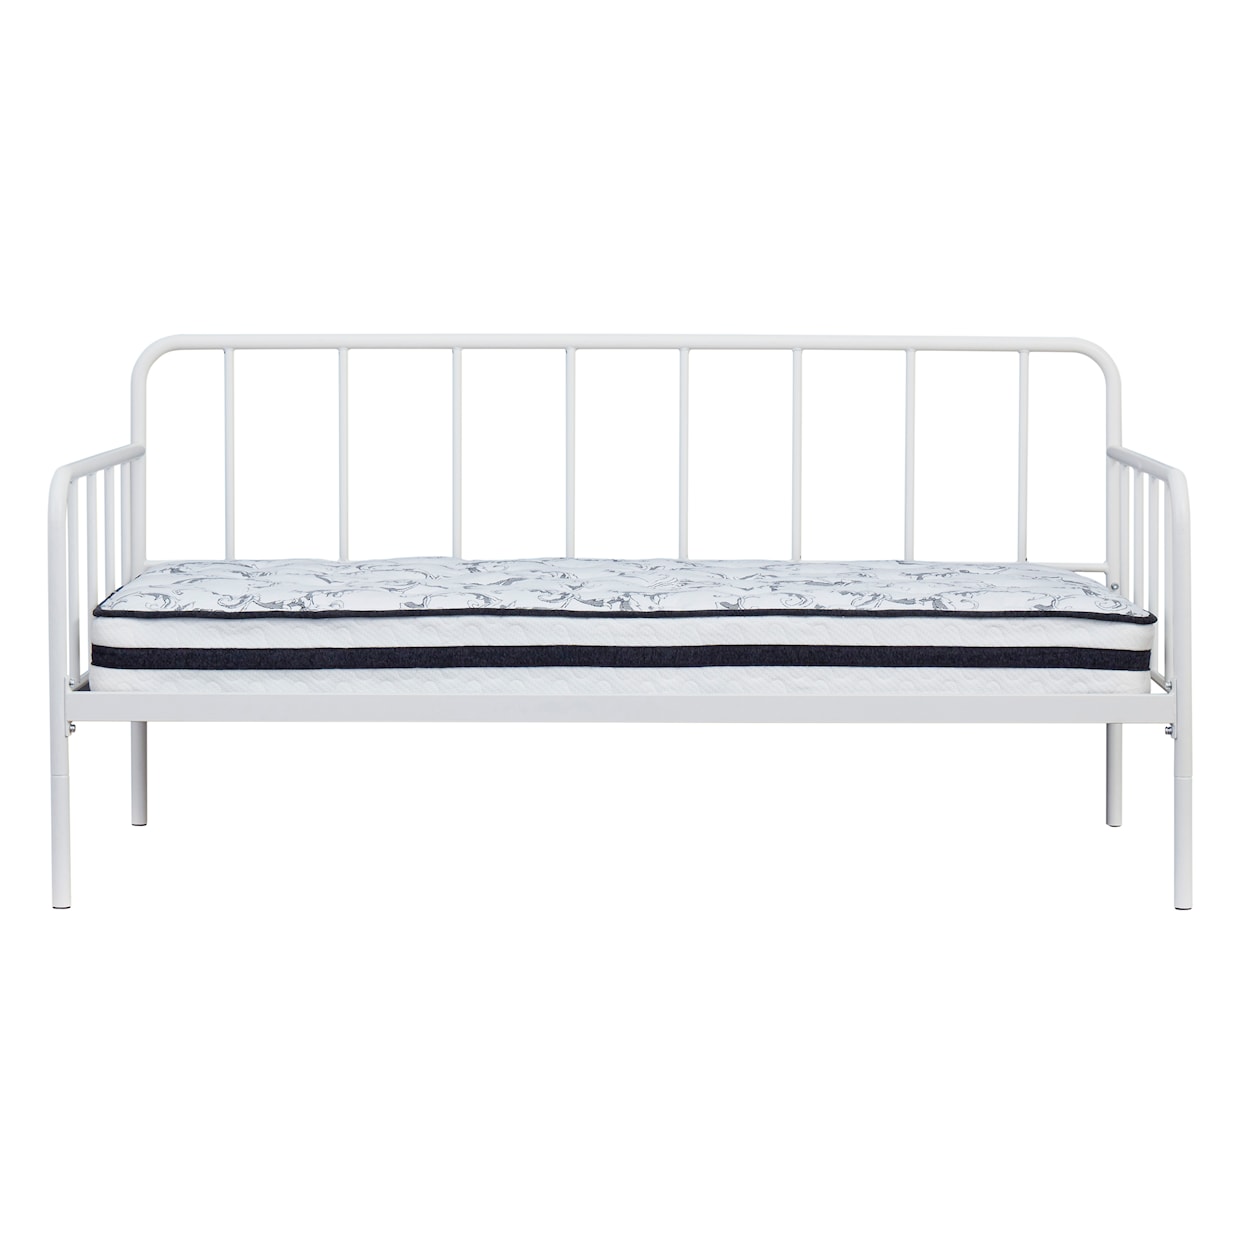 Ashley Furniture Signature Design Trentlore Twin Metal Day Bed with Platform